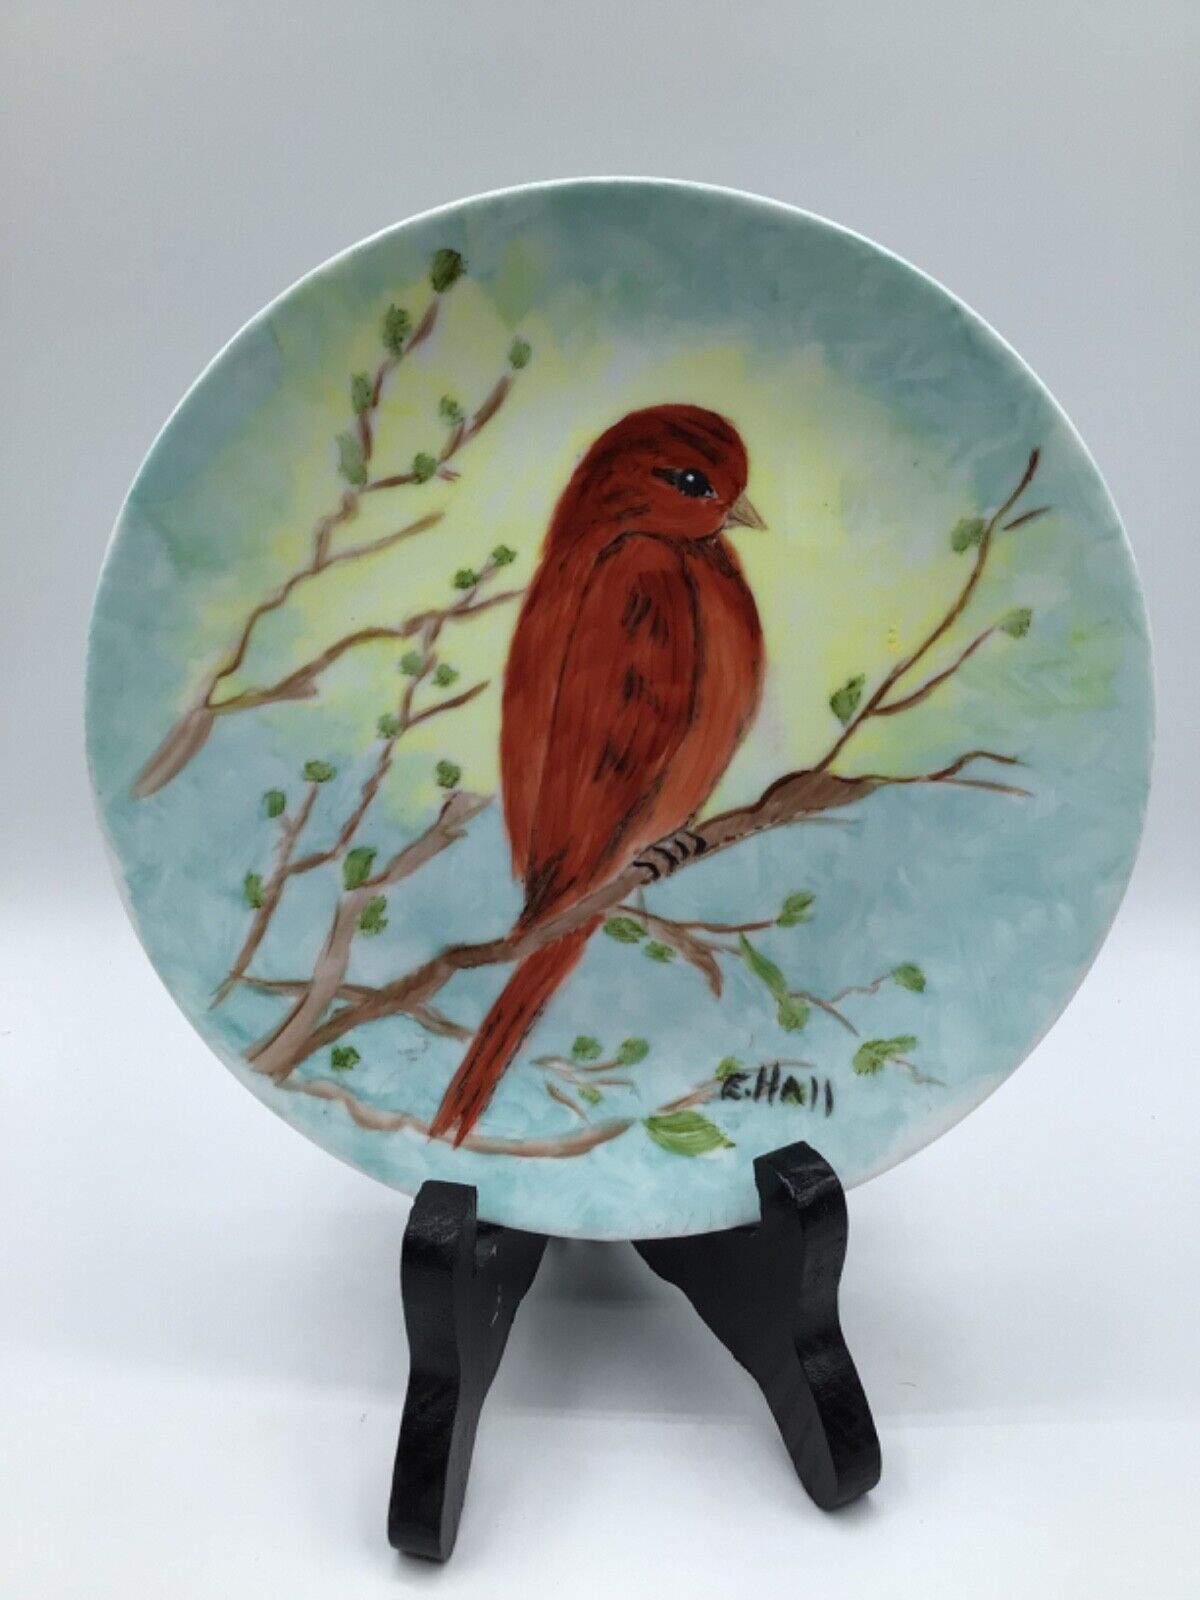 Vintage Hand Painted Porcelain Cabinet Plate Reddish Brown Sparrow by E. Hall 7”